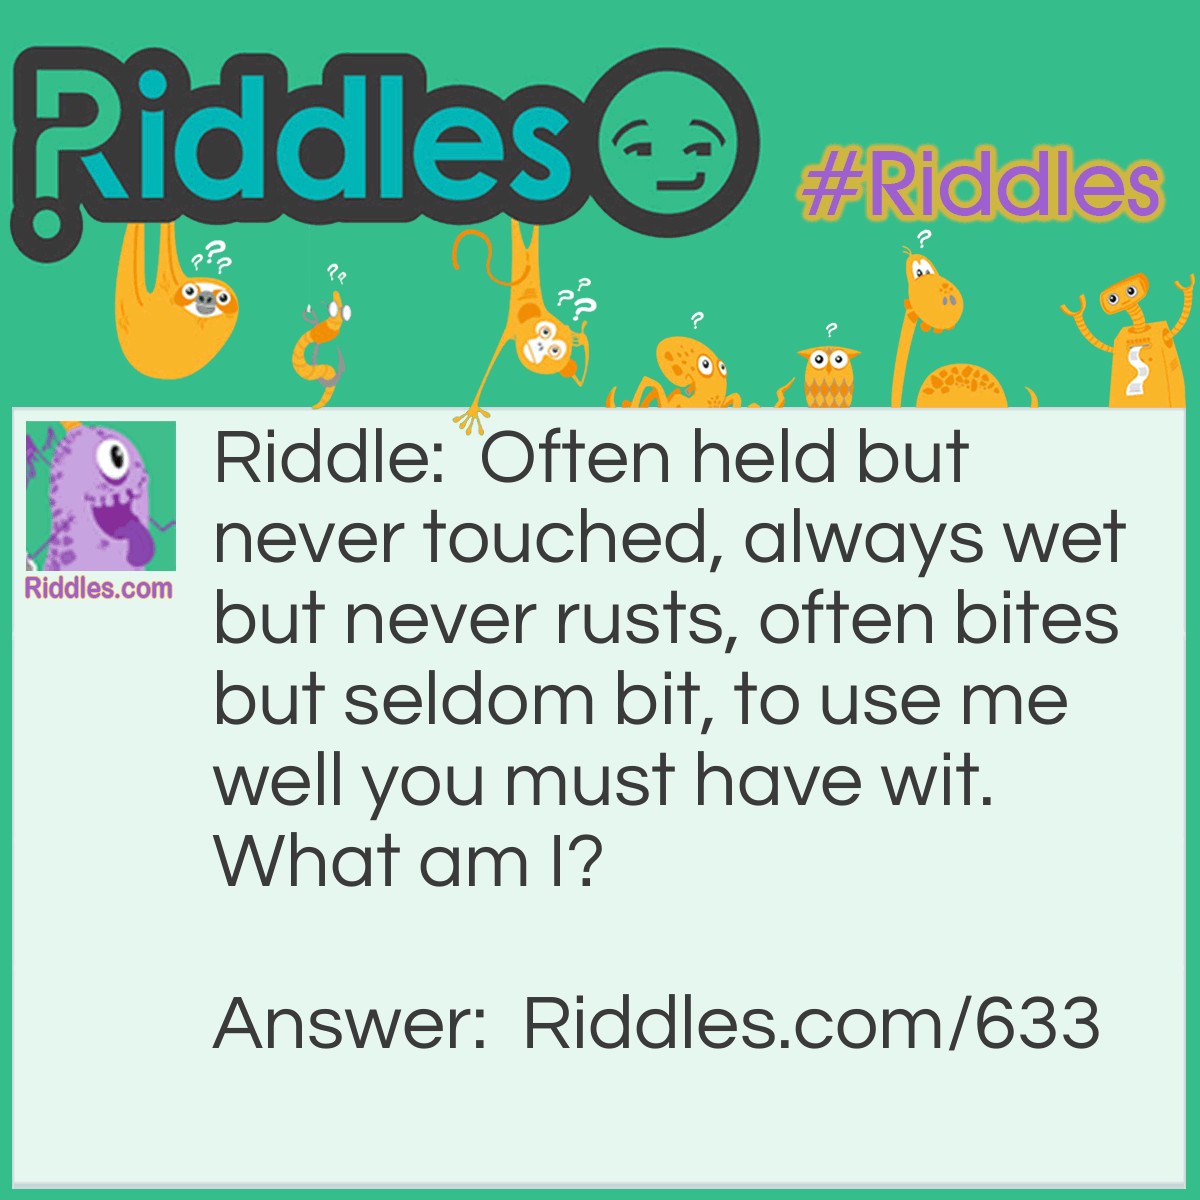 Riddle: Often held but never touched, always wet but never rusts, often bites but seldom bit, to use me well you must have wit.
What am I? Answer: Your tongue.